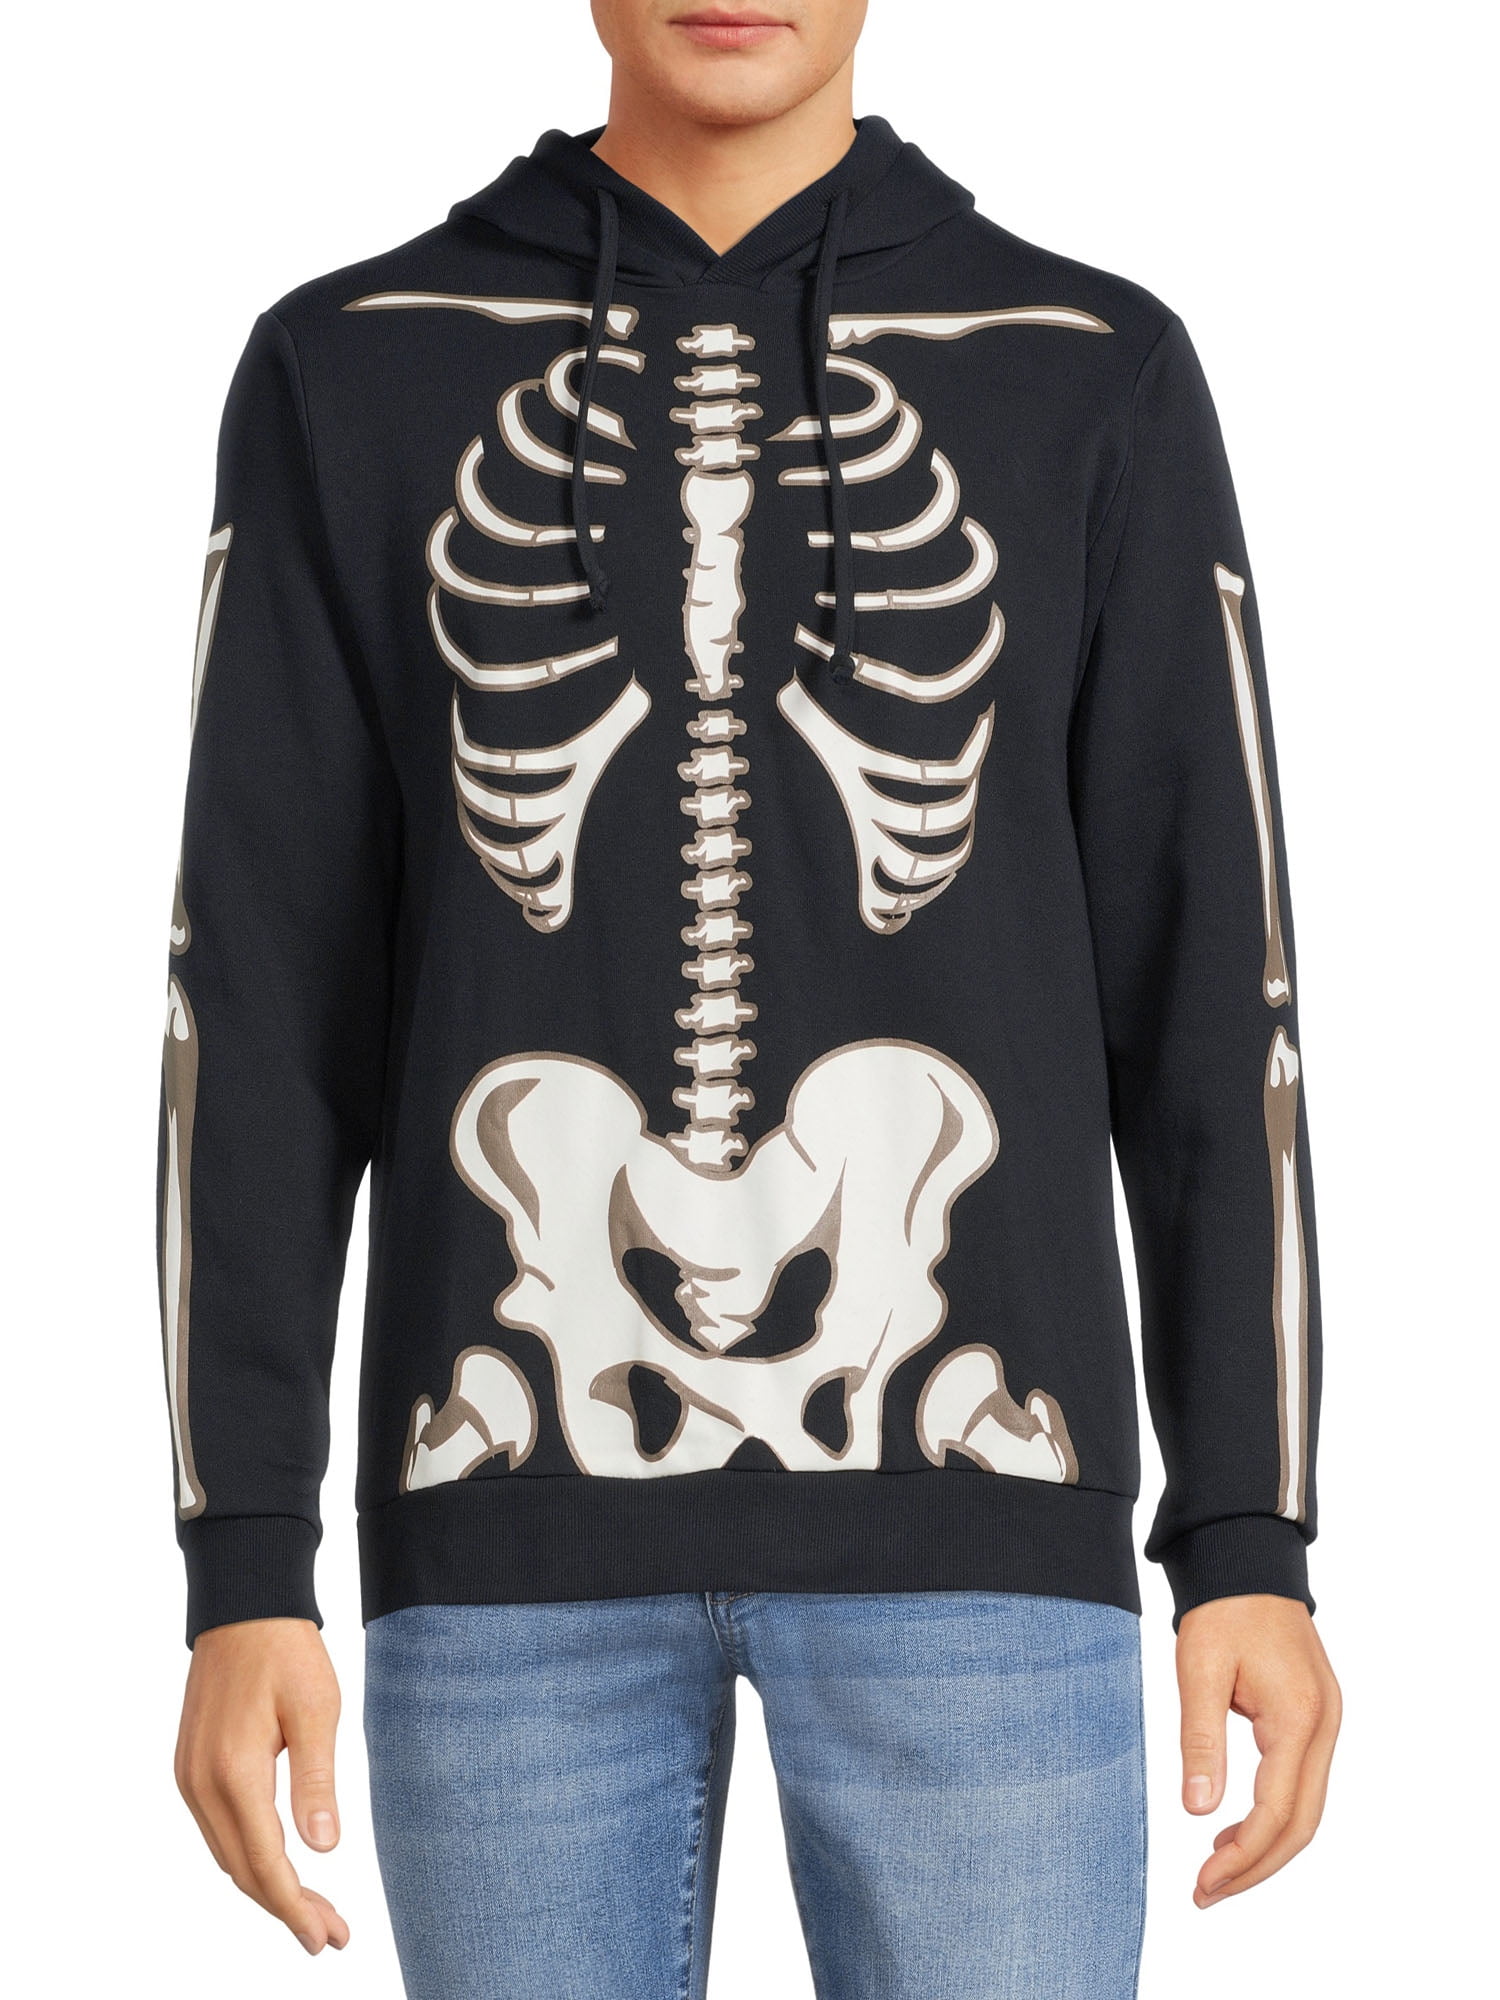 GLOW IN THE DARK Shes My Boo Skeleton Finger Funny Halloween Hoodie Pullover 